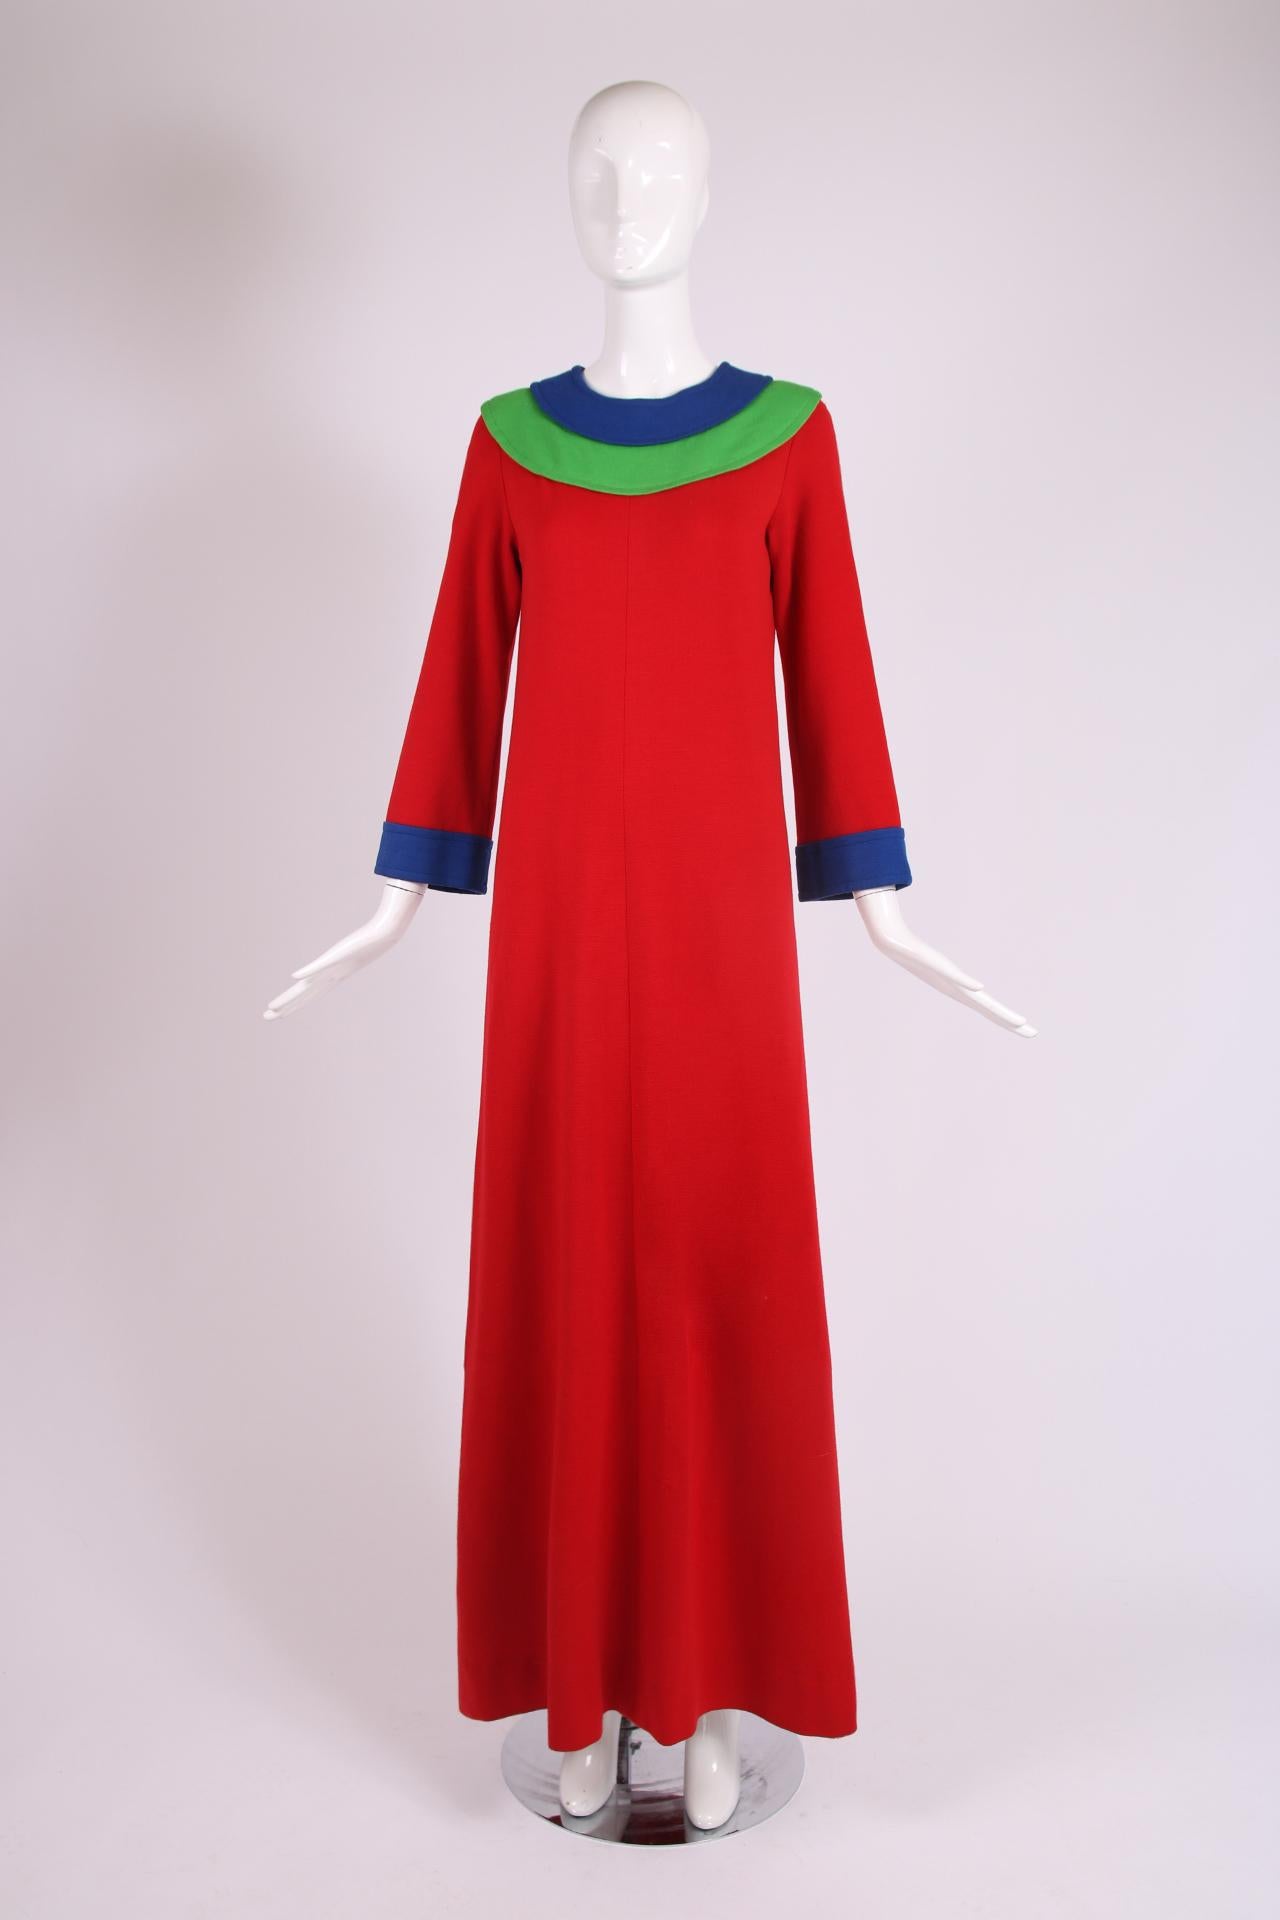 Iconic Yves Saint Laurent red wool maxi dress with blue and green wool trim. The dress is being sold at a deep discount because it has several condition issues - the red interior silk lining has some tears and holes, the red wool fabric has been